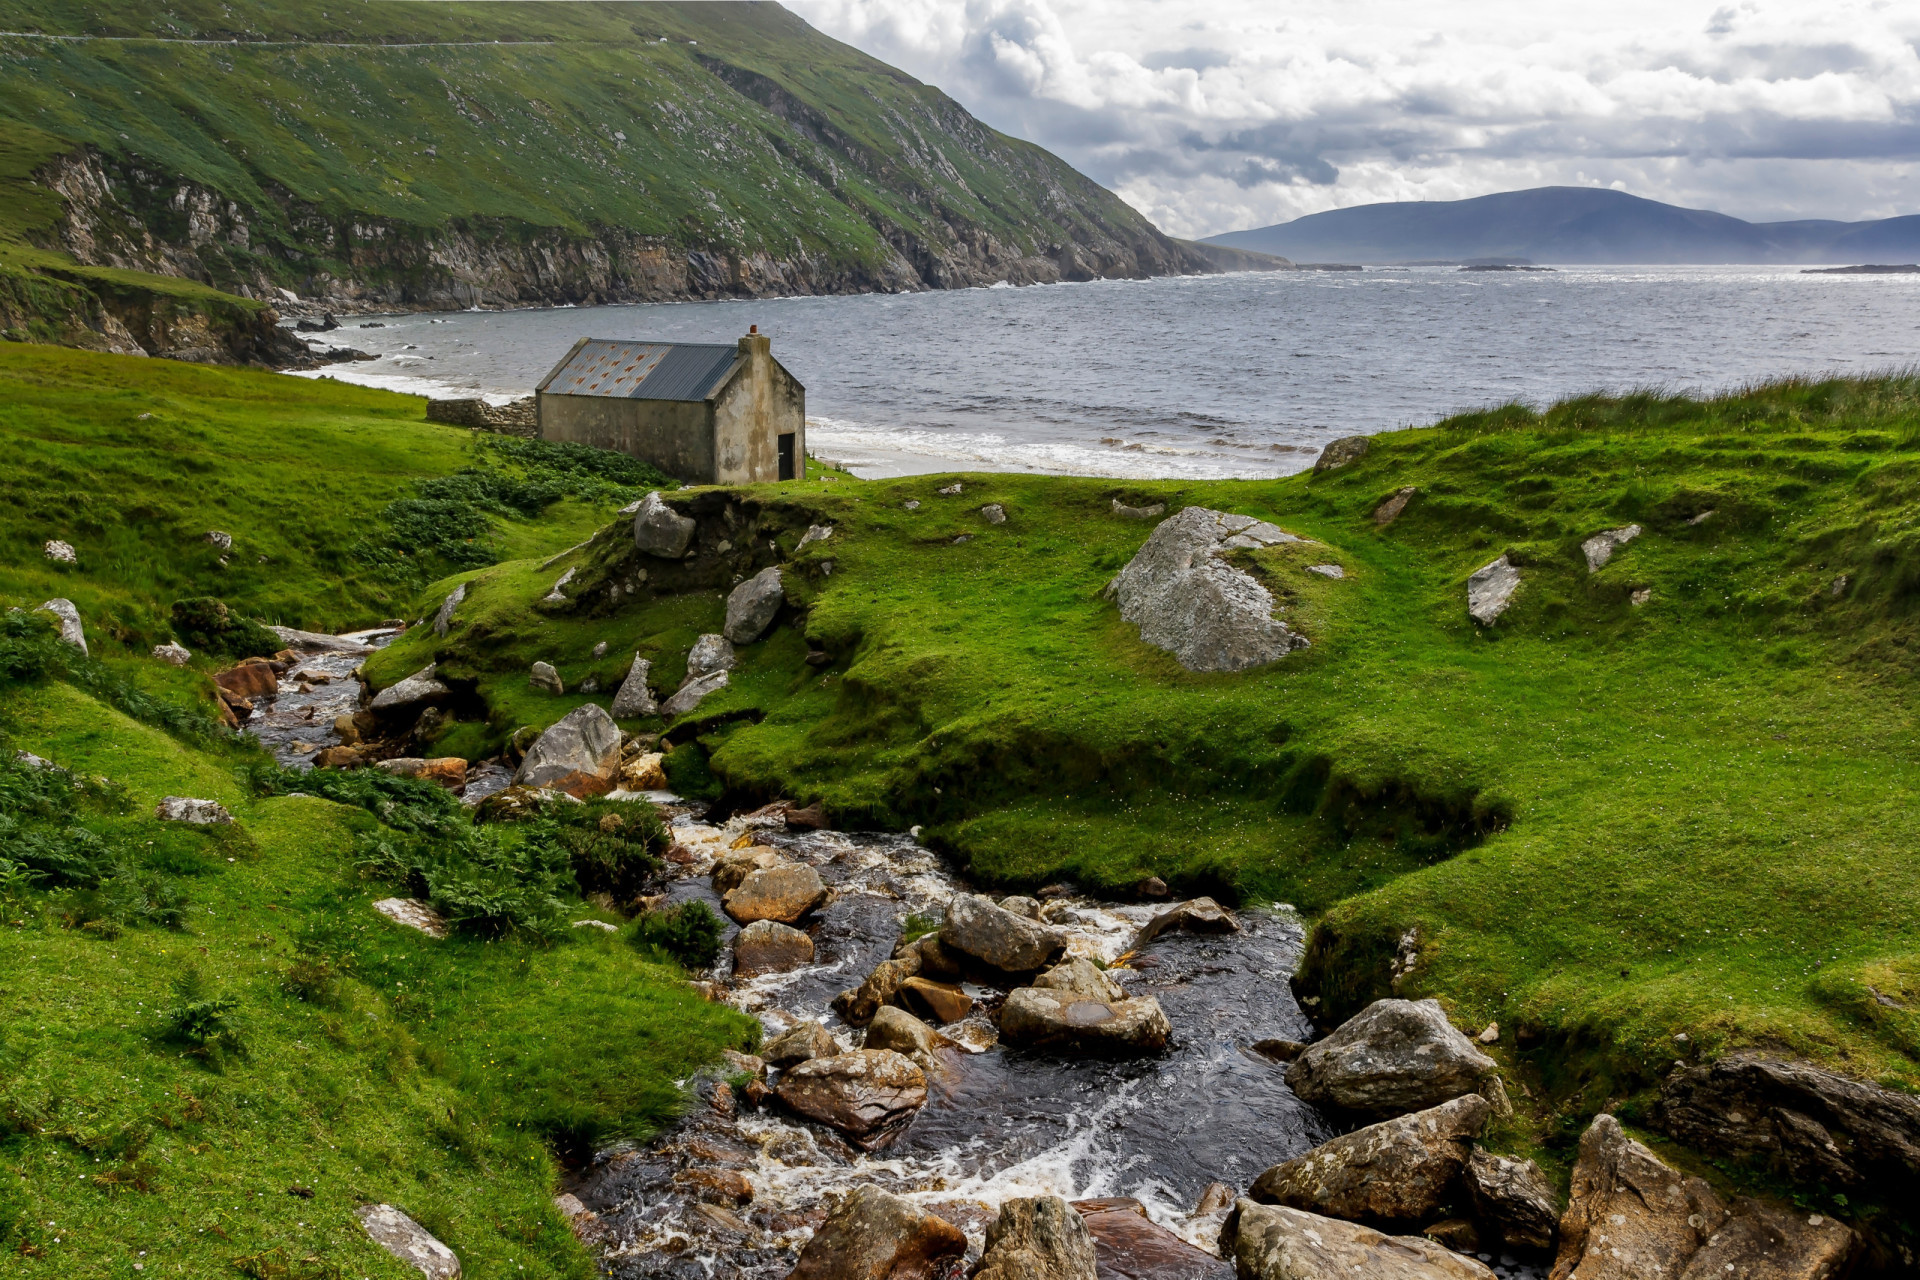 <p>If you're a fan of nature and the slower-paced life, perhaps you should consider adding <a href="https://www.starsinsider.com/travel/283631/ireland-forever-the-emerald-isle" rel="noopener">Ireland</a>'s islands to your travel bucket list. Apart from the jaw-dropping, raw, and rocky coastline, the islands themselves are home to rare wildlife, with many also containing ruins that offer a window into the past. It's not difficult to imagine the myth of ancient Irish folklore as you explore these landscapes. What's more, the western location of these islands make them the perfect place to get a front row seat to some of the most stunning sunsets you'll witness!</p> <p>Intrigued? Click on the following gallery to discover the Irish islands you need to visit.</p><p>You may also like: </p>